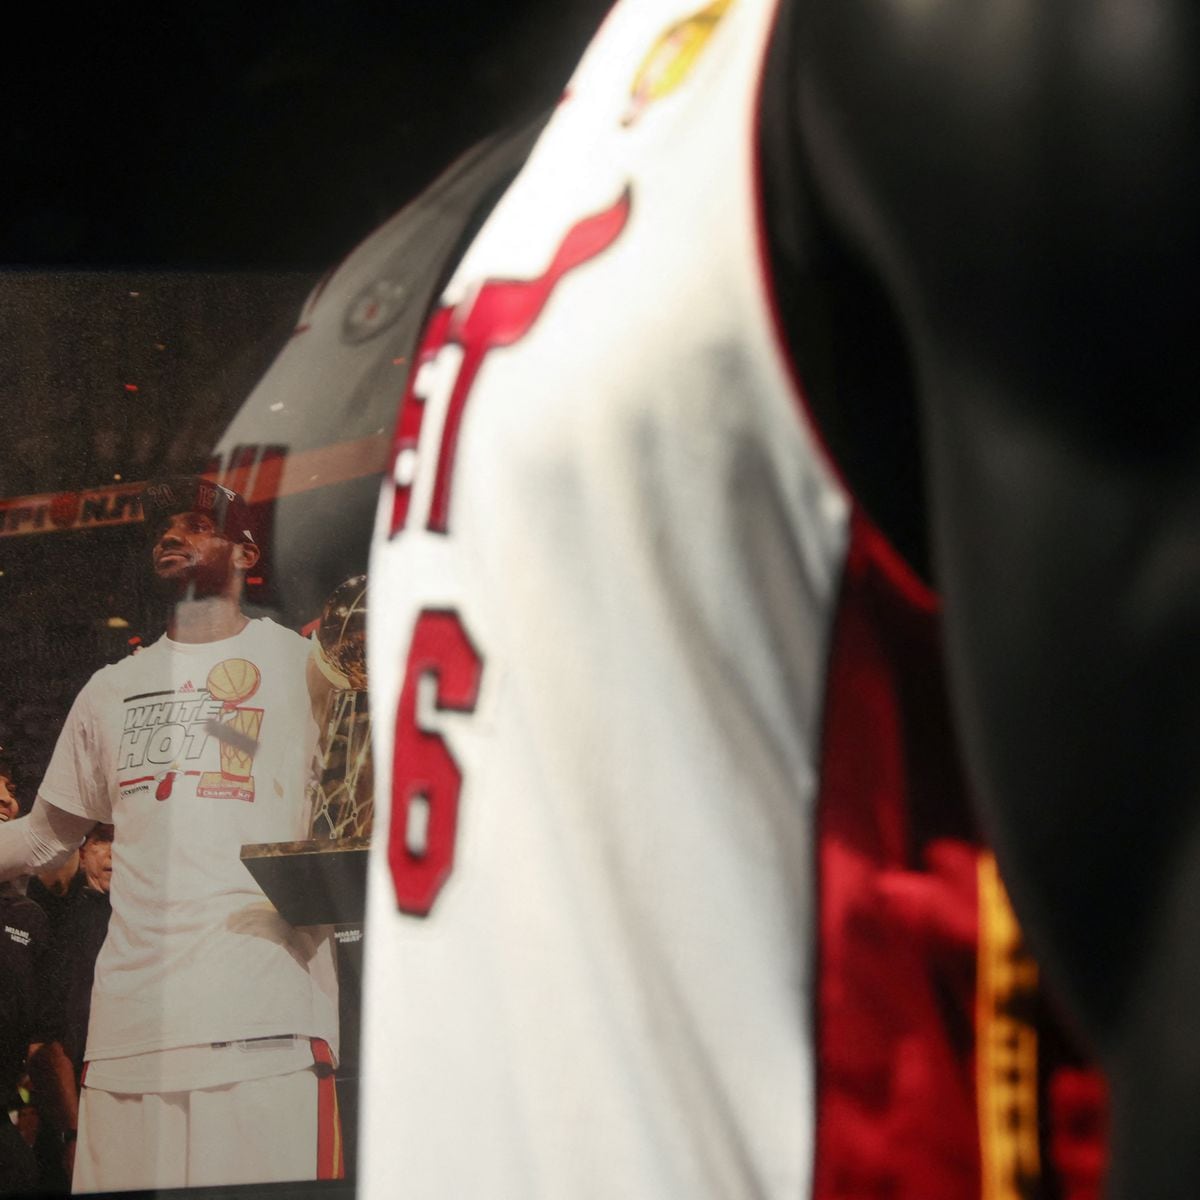 Does Having Top-Selling NBA Jersey Translate To NBA Championship?